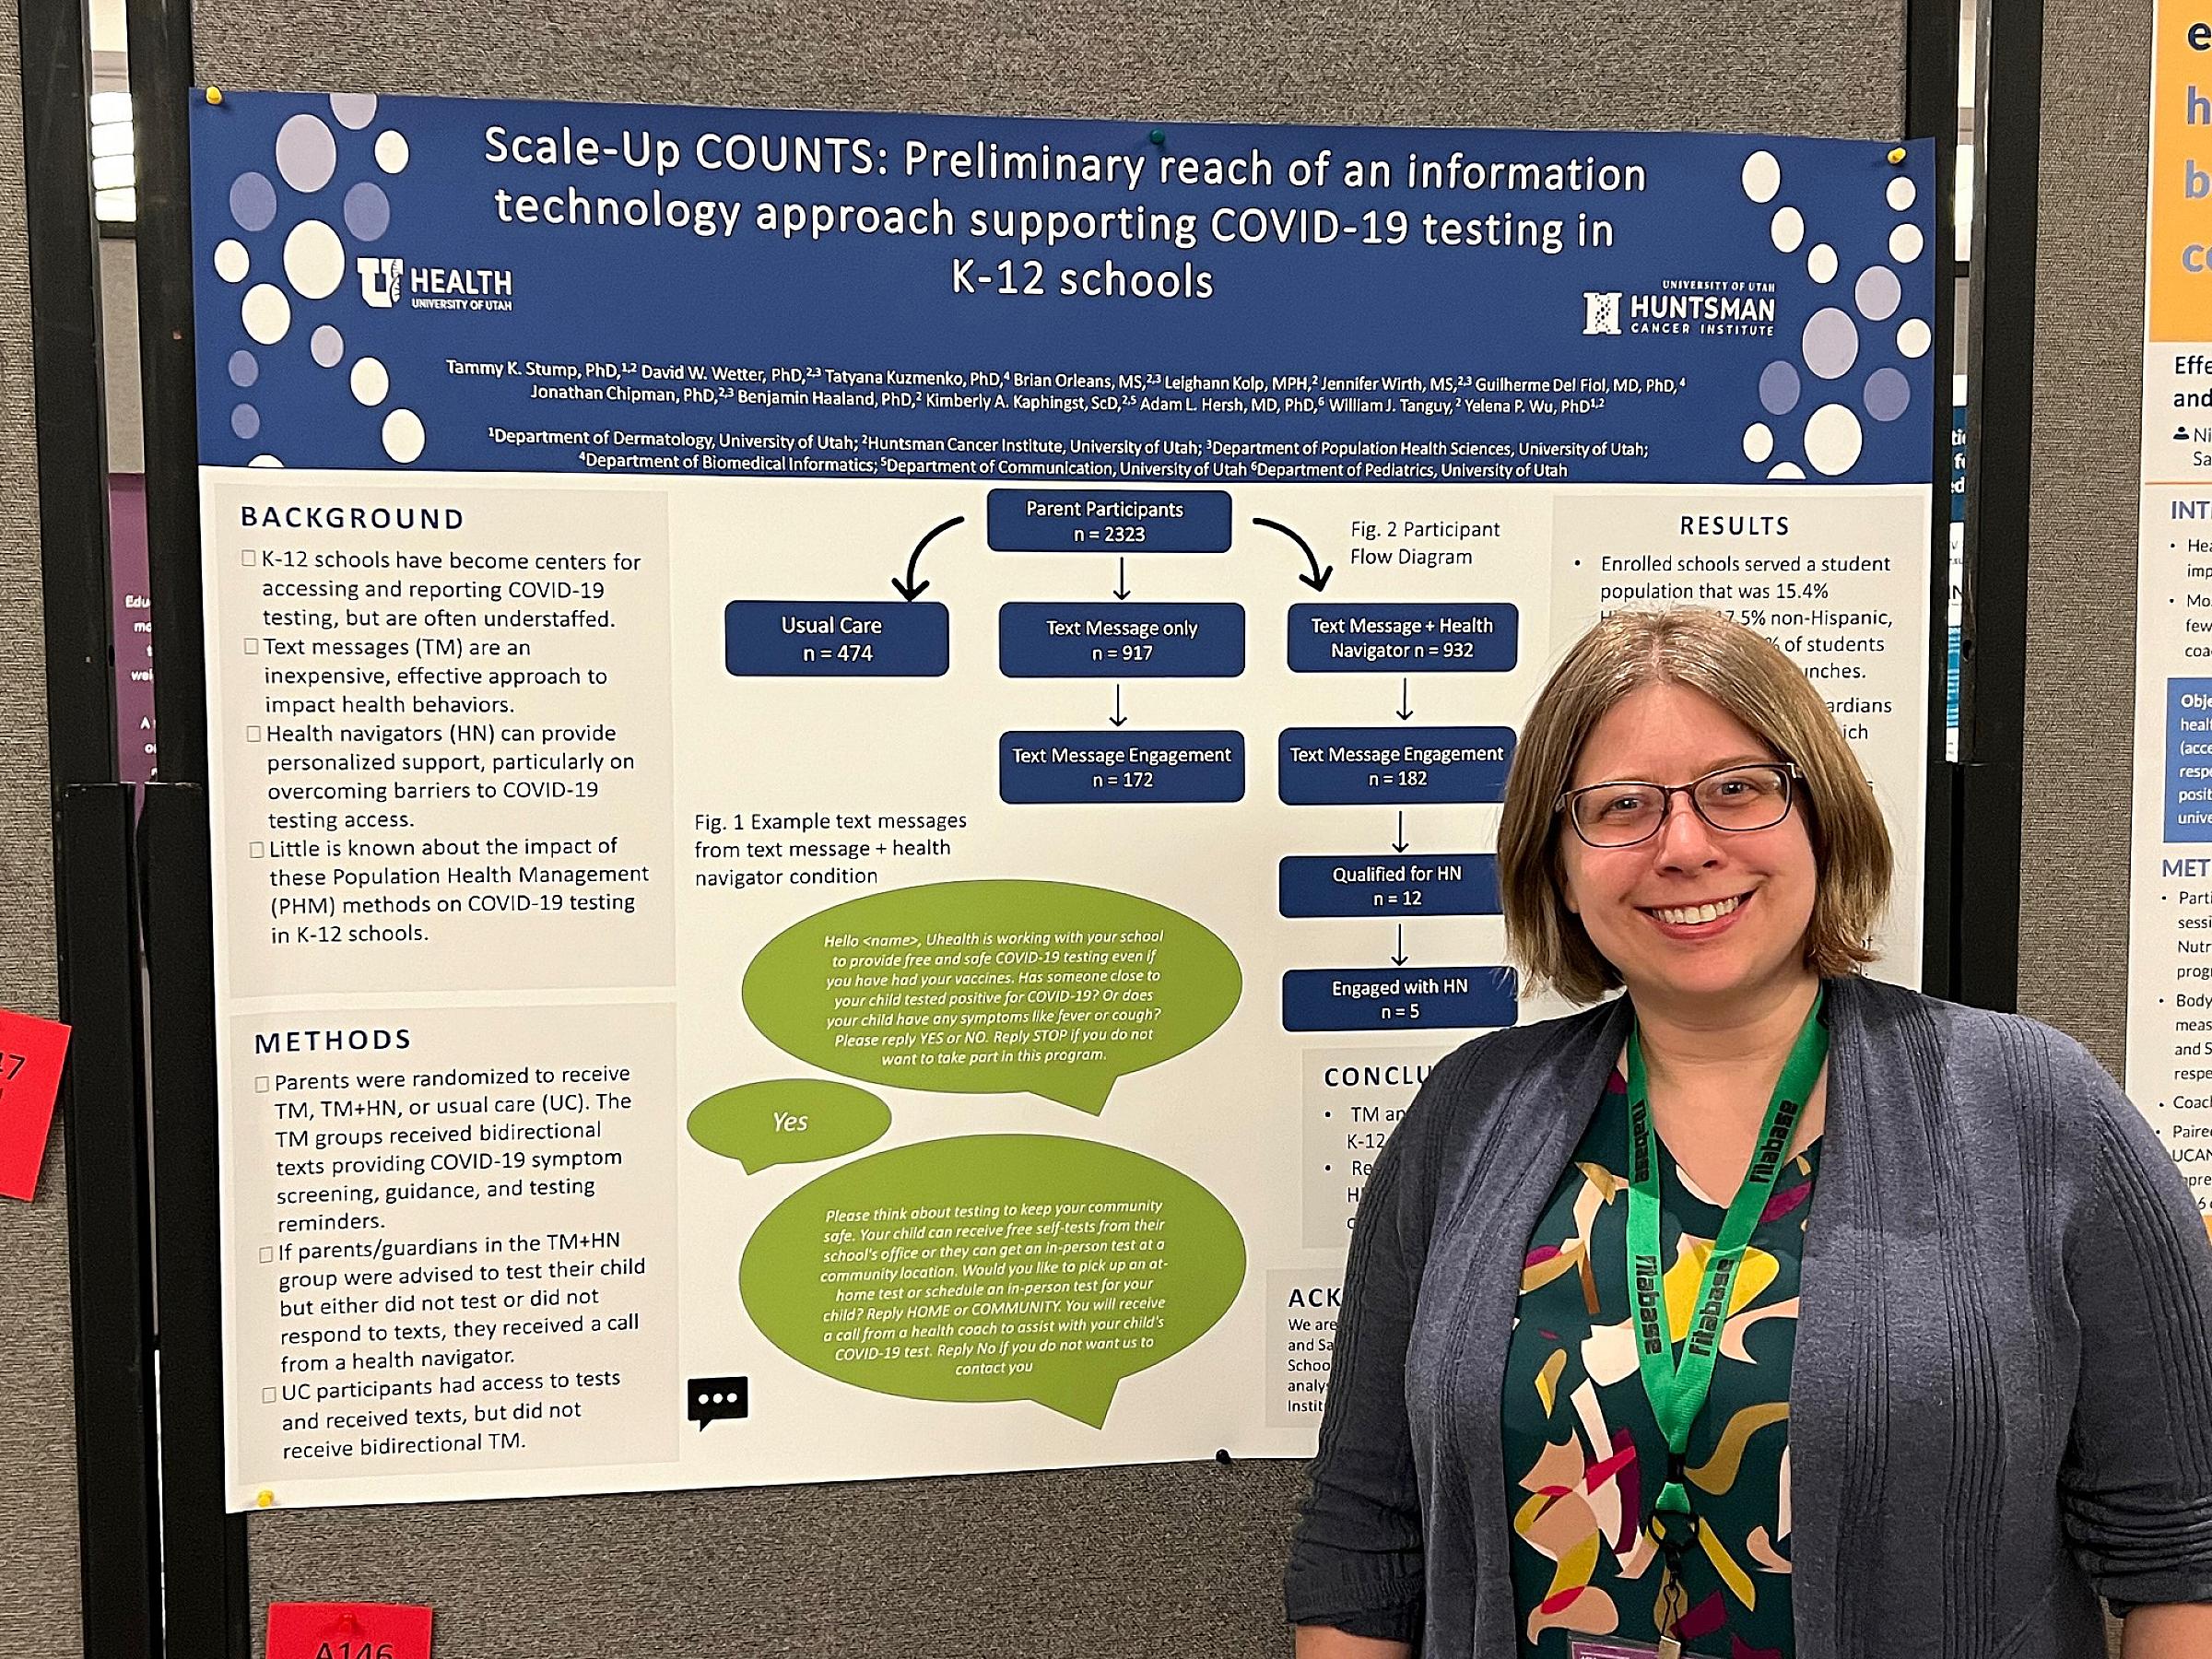 Dr. Tammy Stump, PhD presenting the SCALE-UP Counts study at the Annual Meeting for the Society of Behavioral Medicine Conference in Phoenix, Arizona in April 2023.